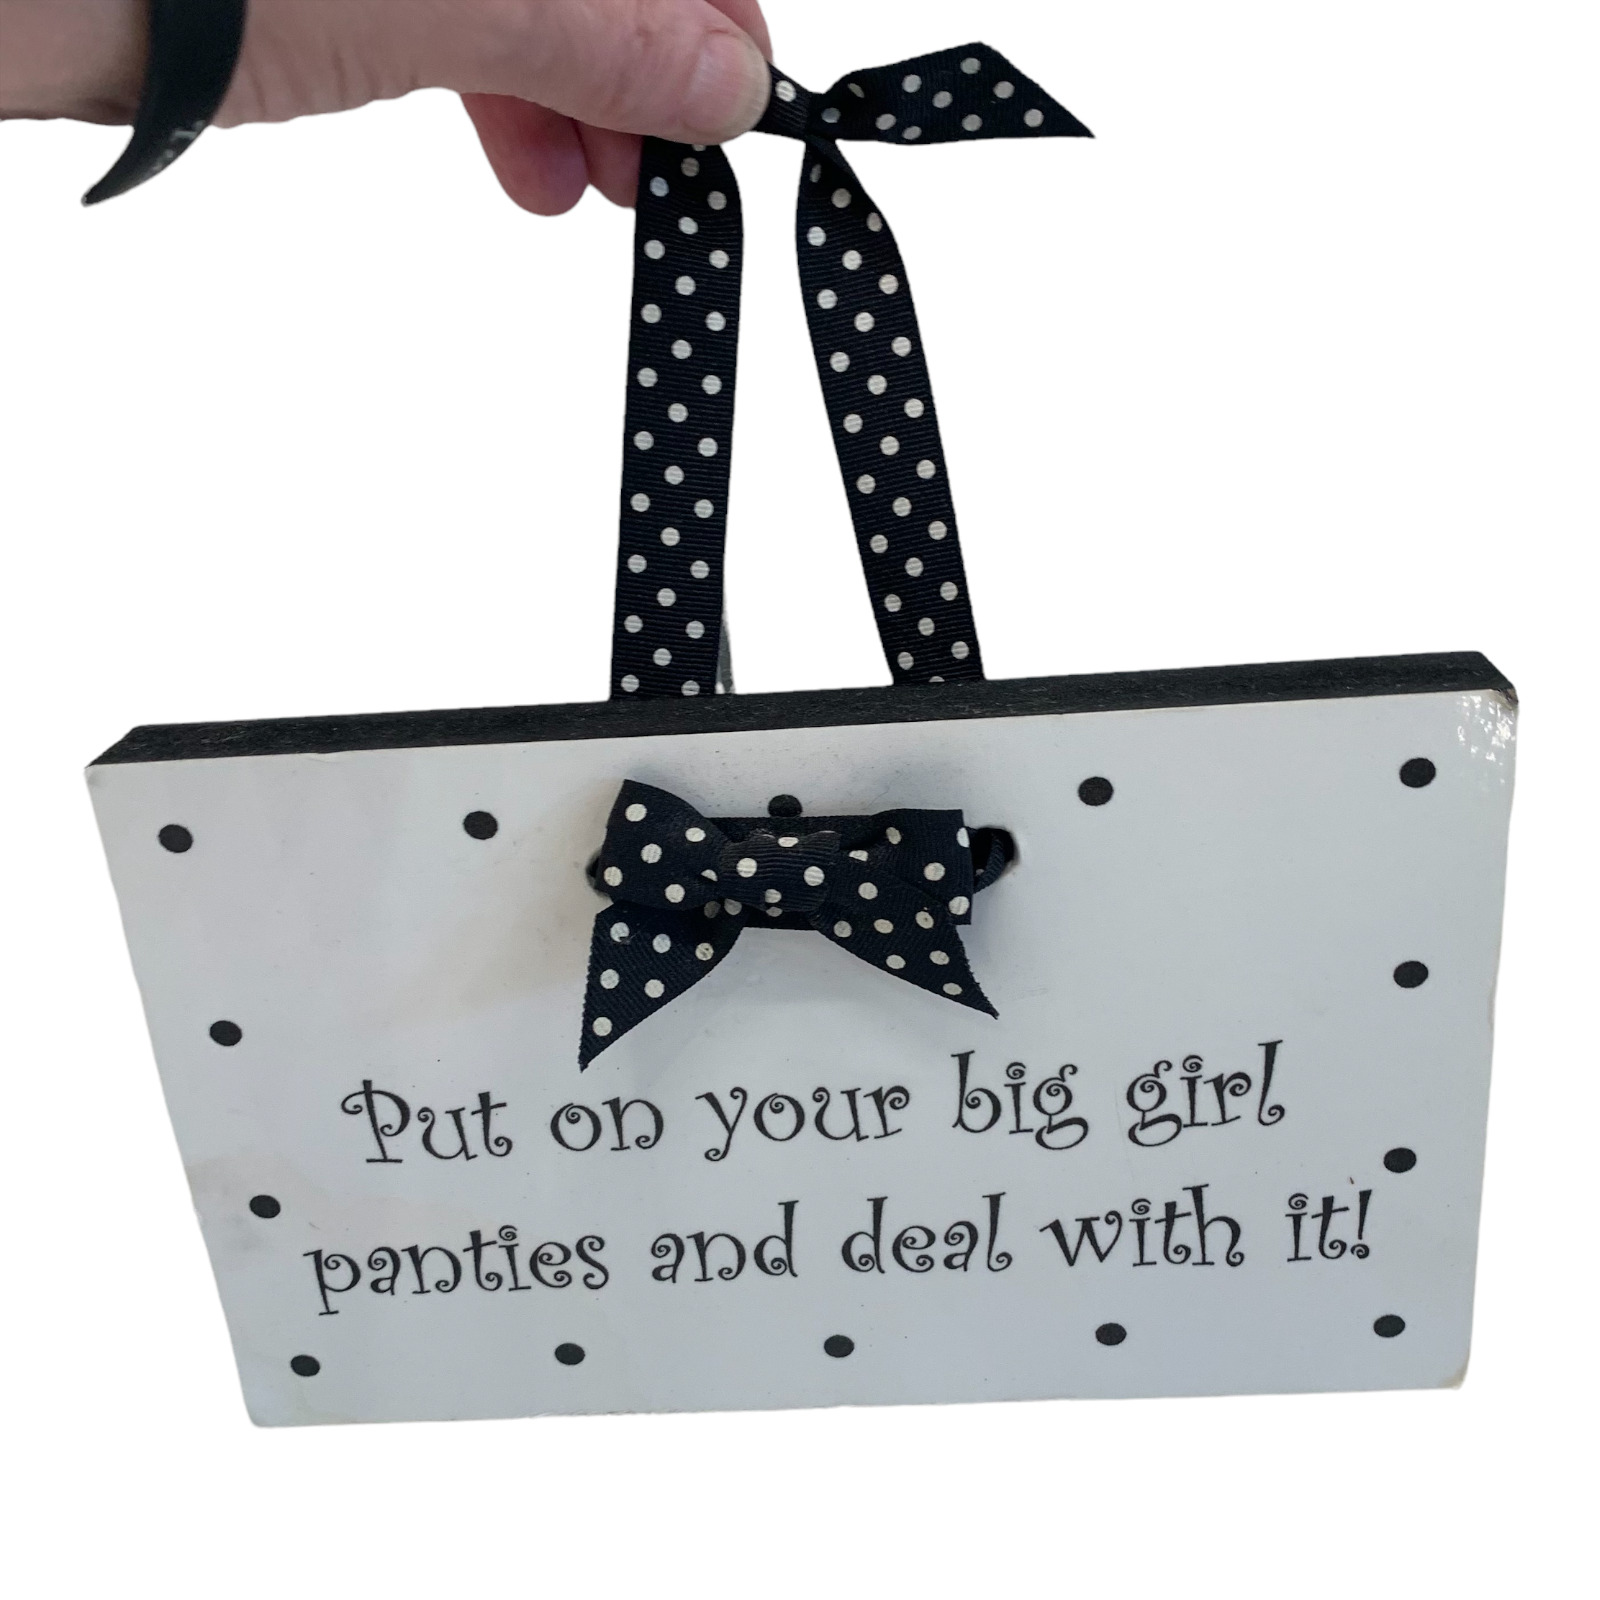 Put On Your Big Girl Panties And Deal With It Vintage Funny Humor Wooden Sign